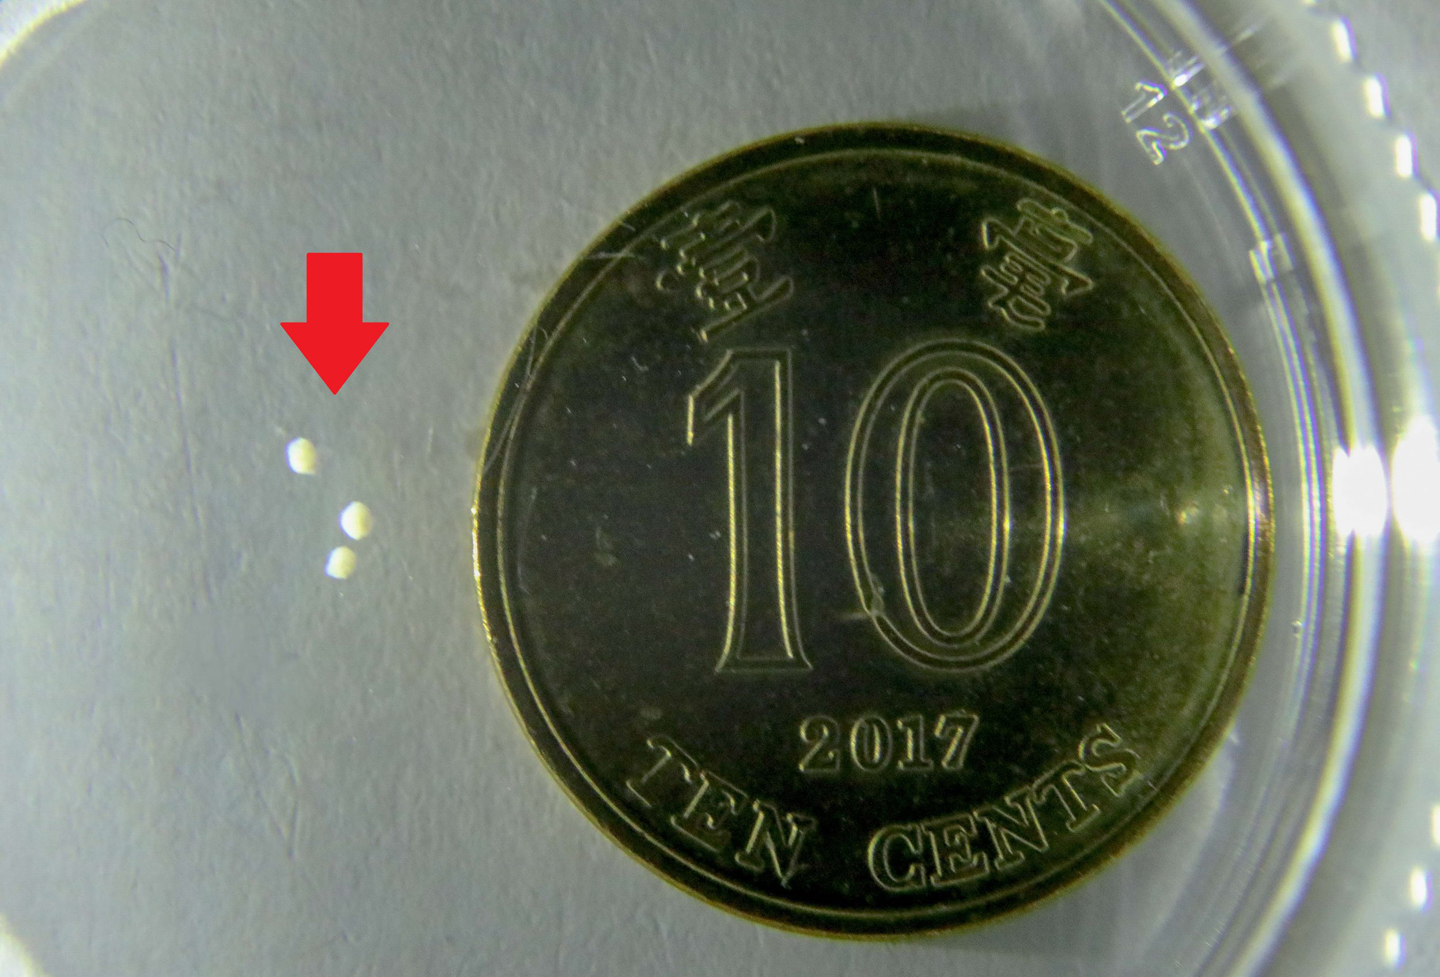 The mini-robots compared (under red arrow) to a 10-cent coin